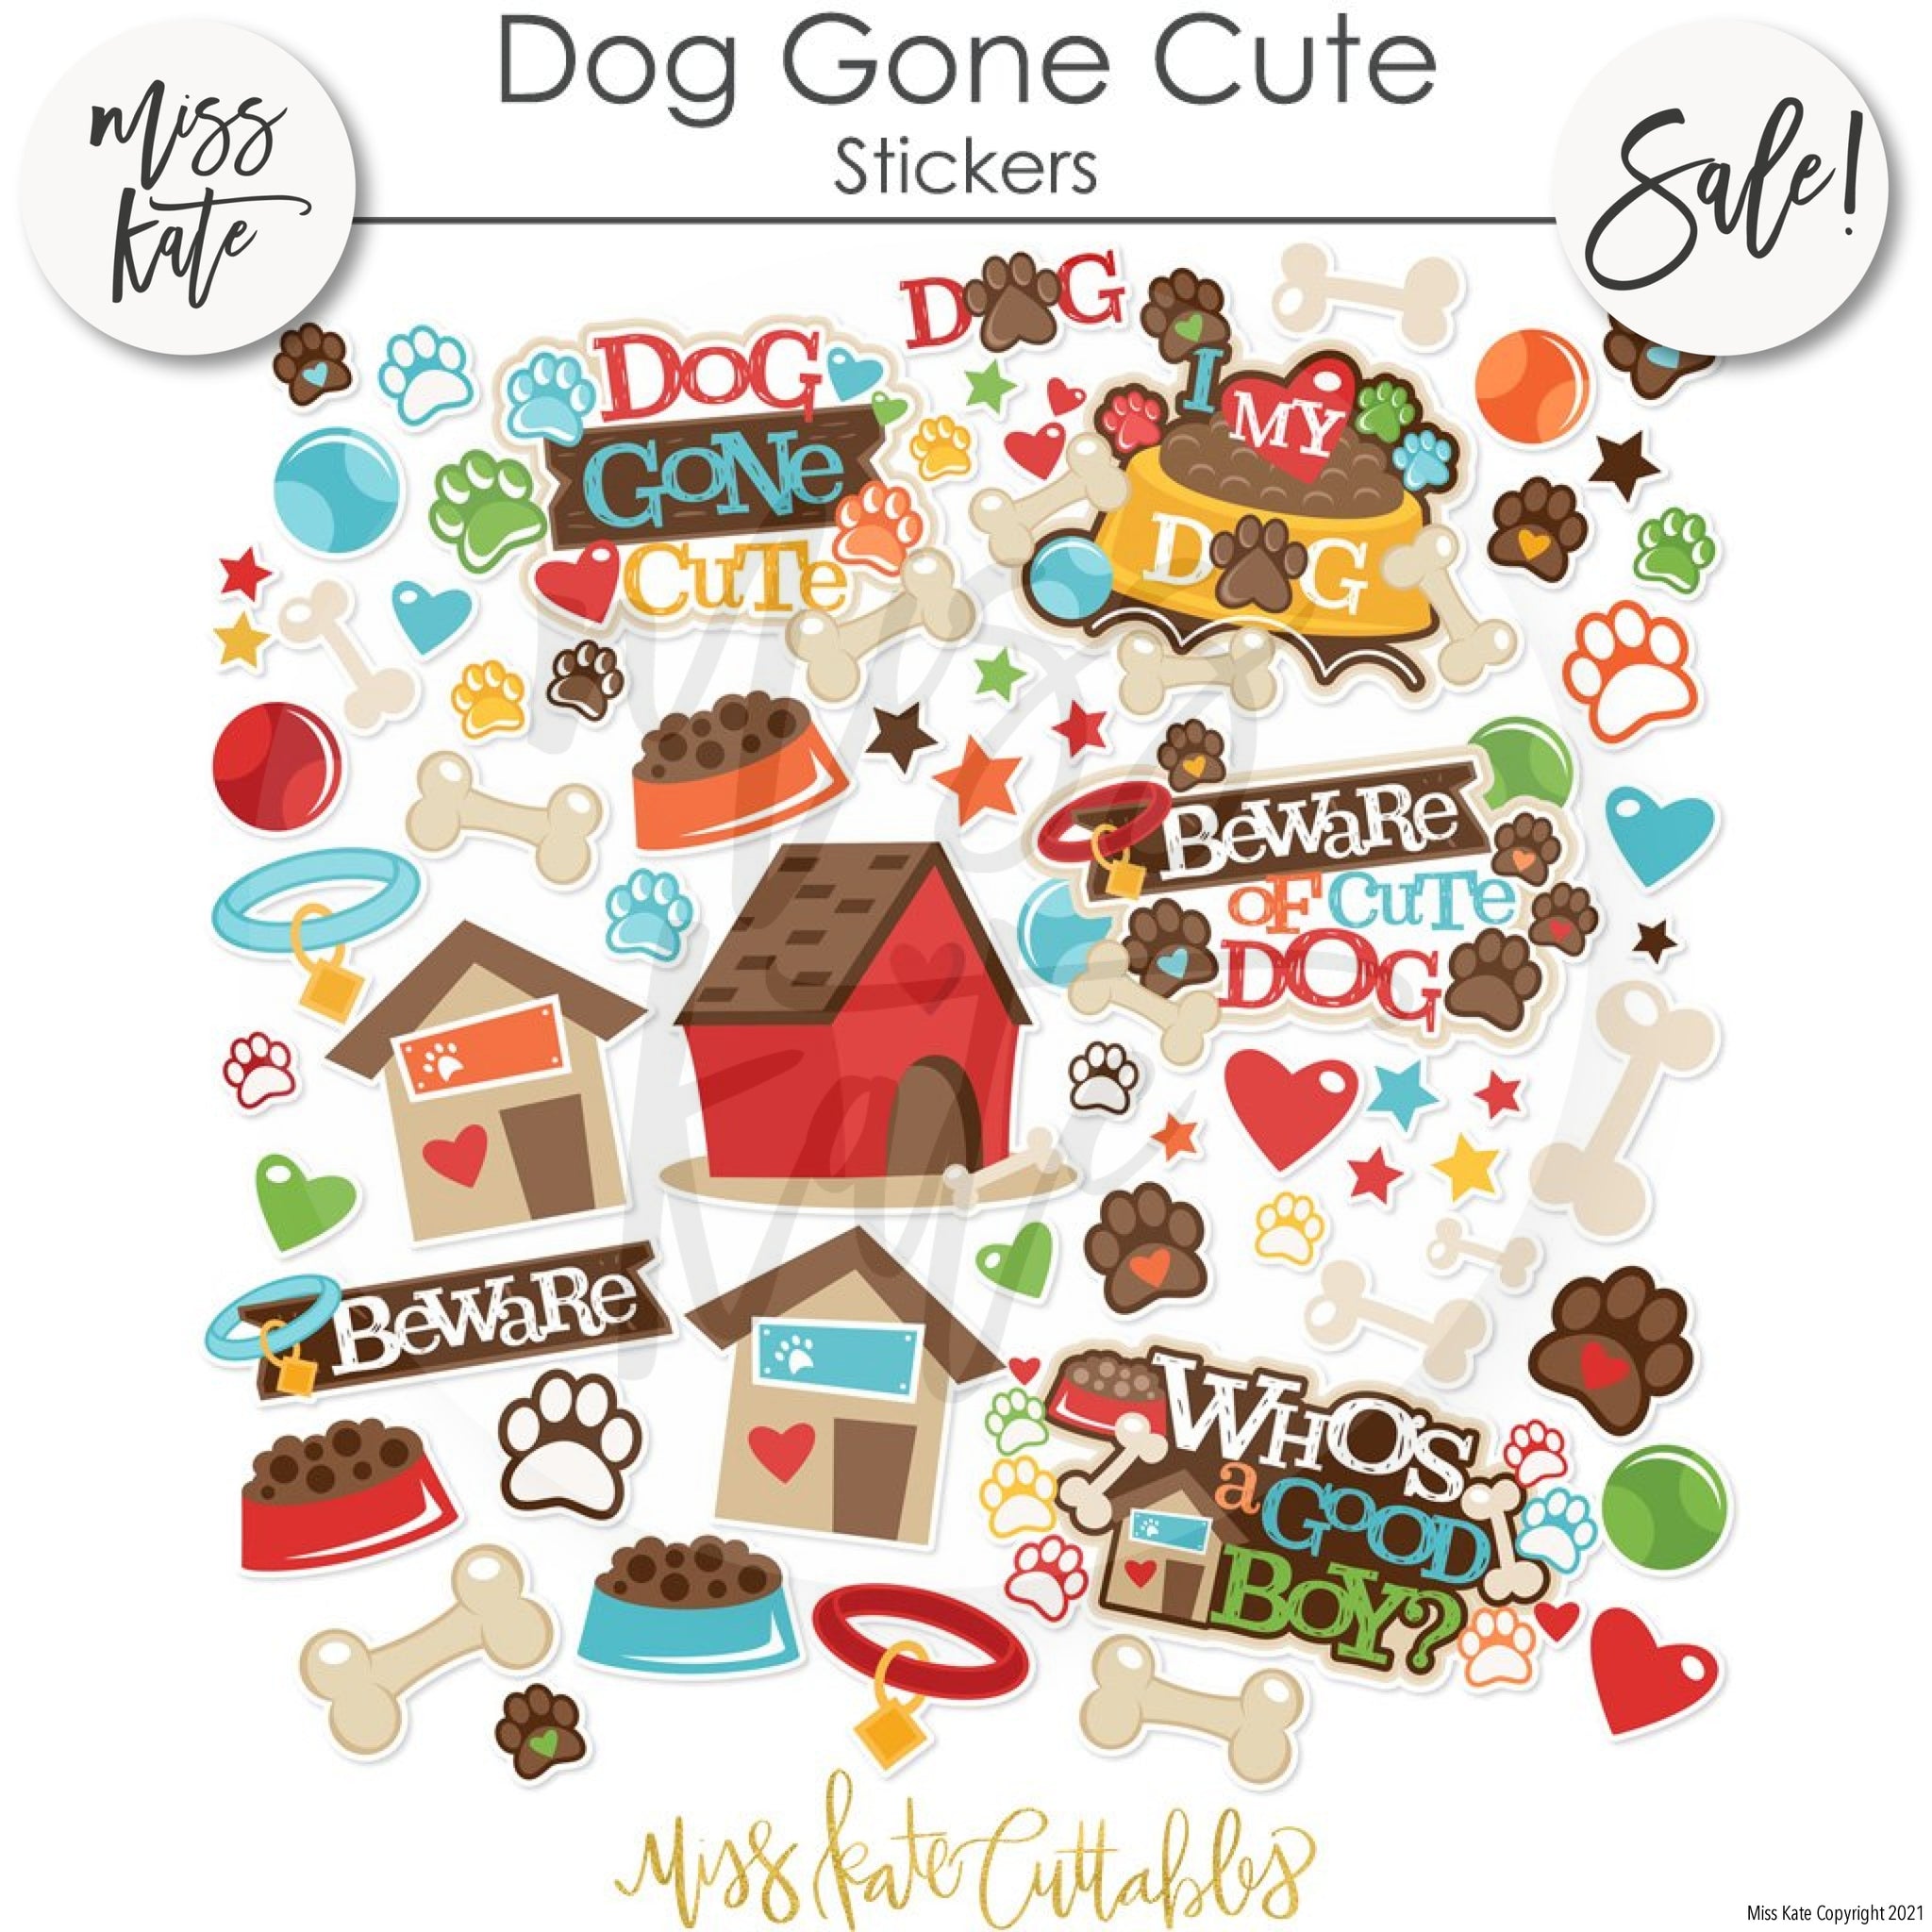 Paper House Mini Mixed Dogs Stickers